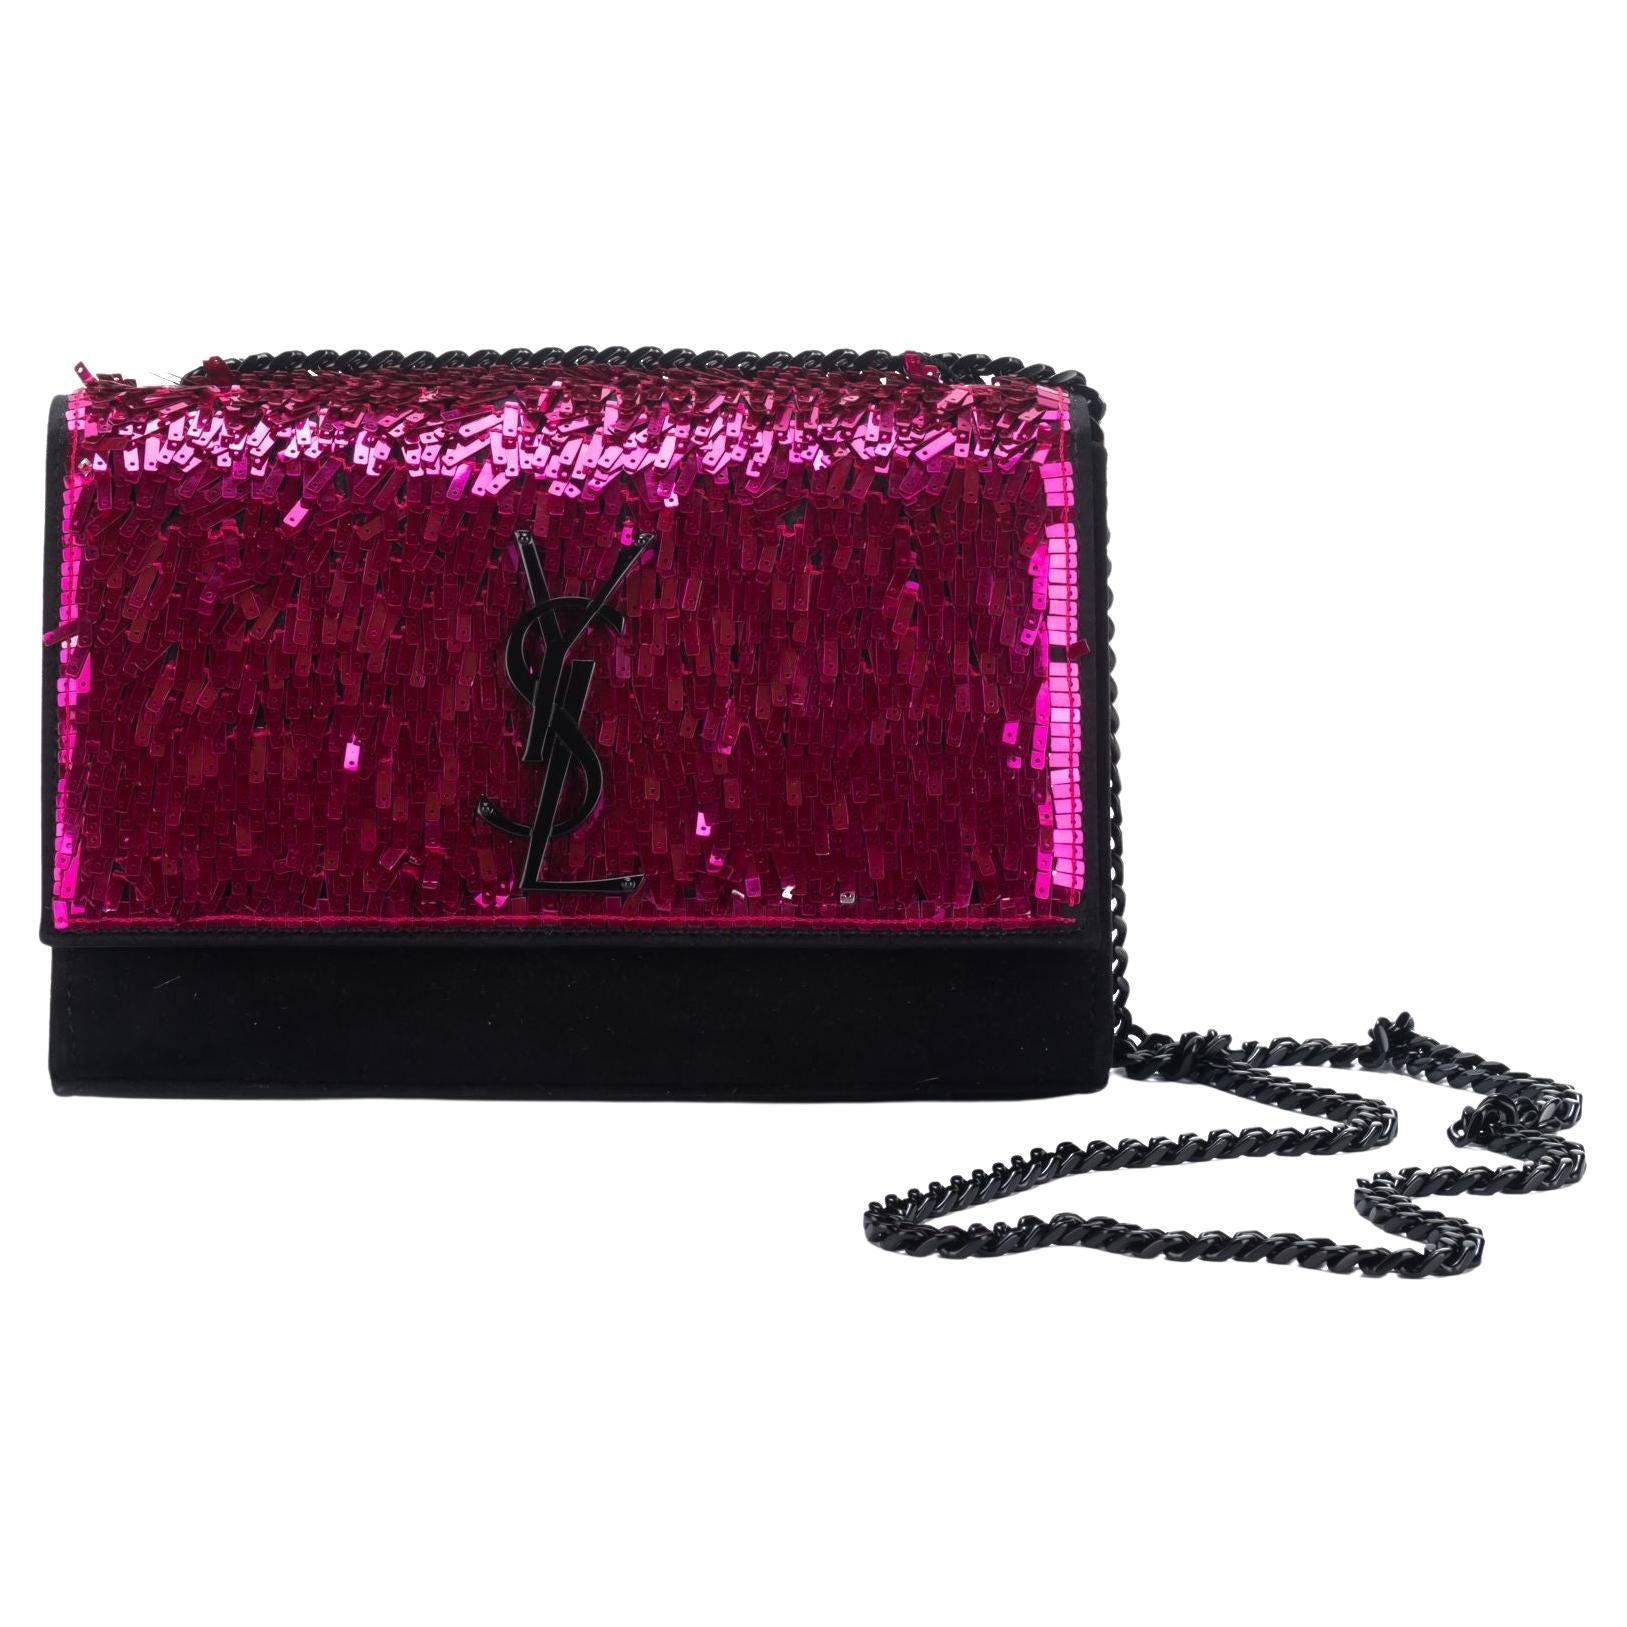 fully lined BN OVER SIZED BLACK & FUCHSIA PINK faux leather  clutch bag 